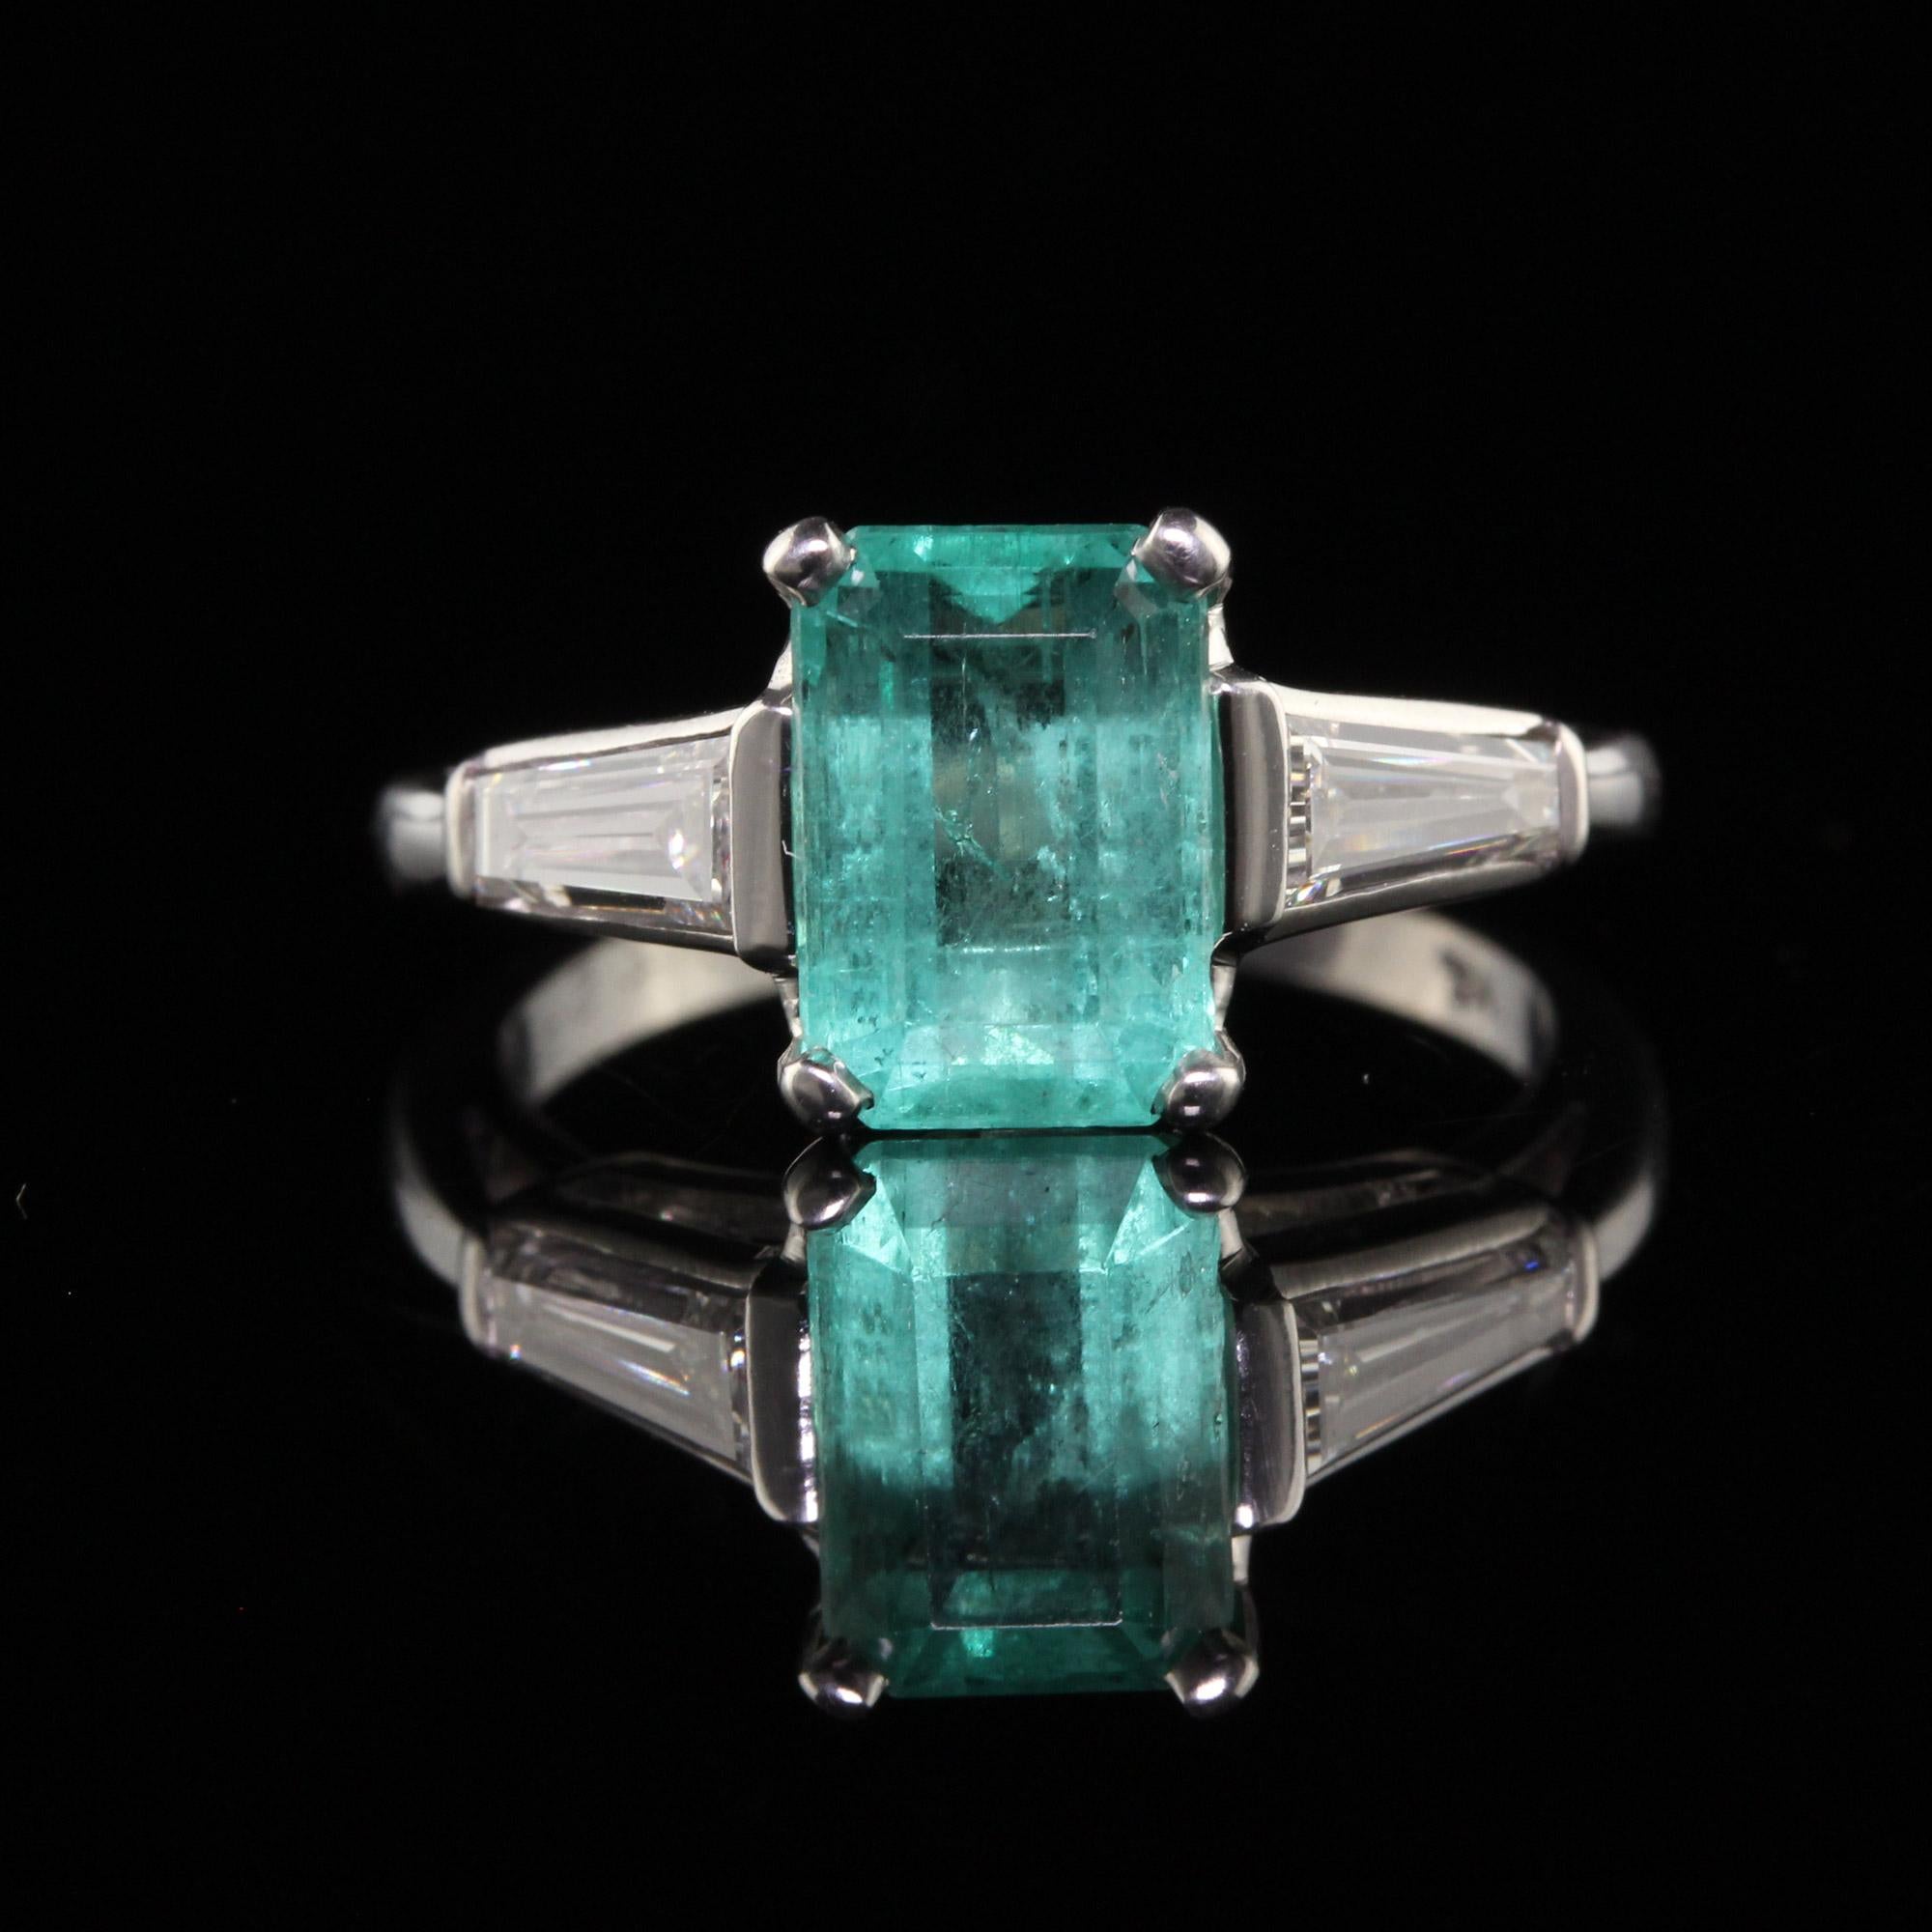 Vintage Retro Platinum Colombian Emerald Diamond Baguette Engagement Ring In Good Condition For Sale In Great Neck, NY